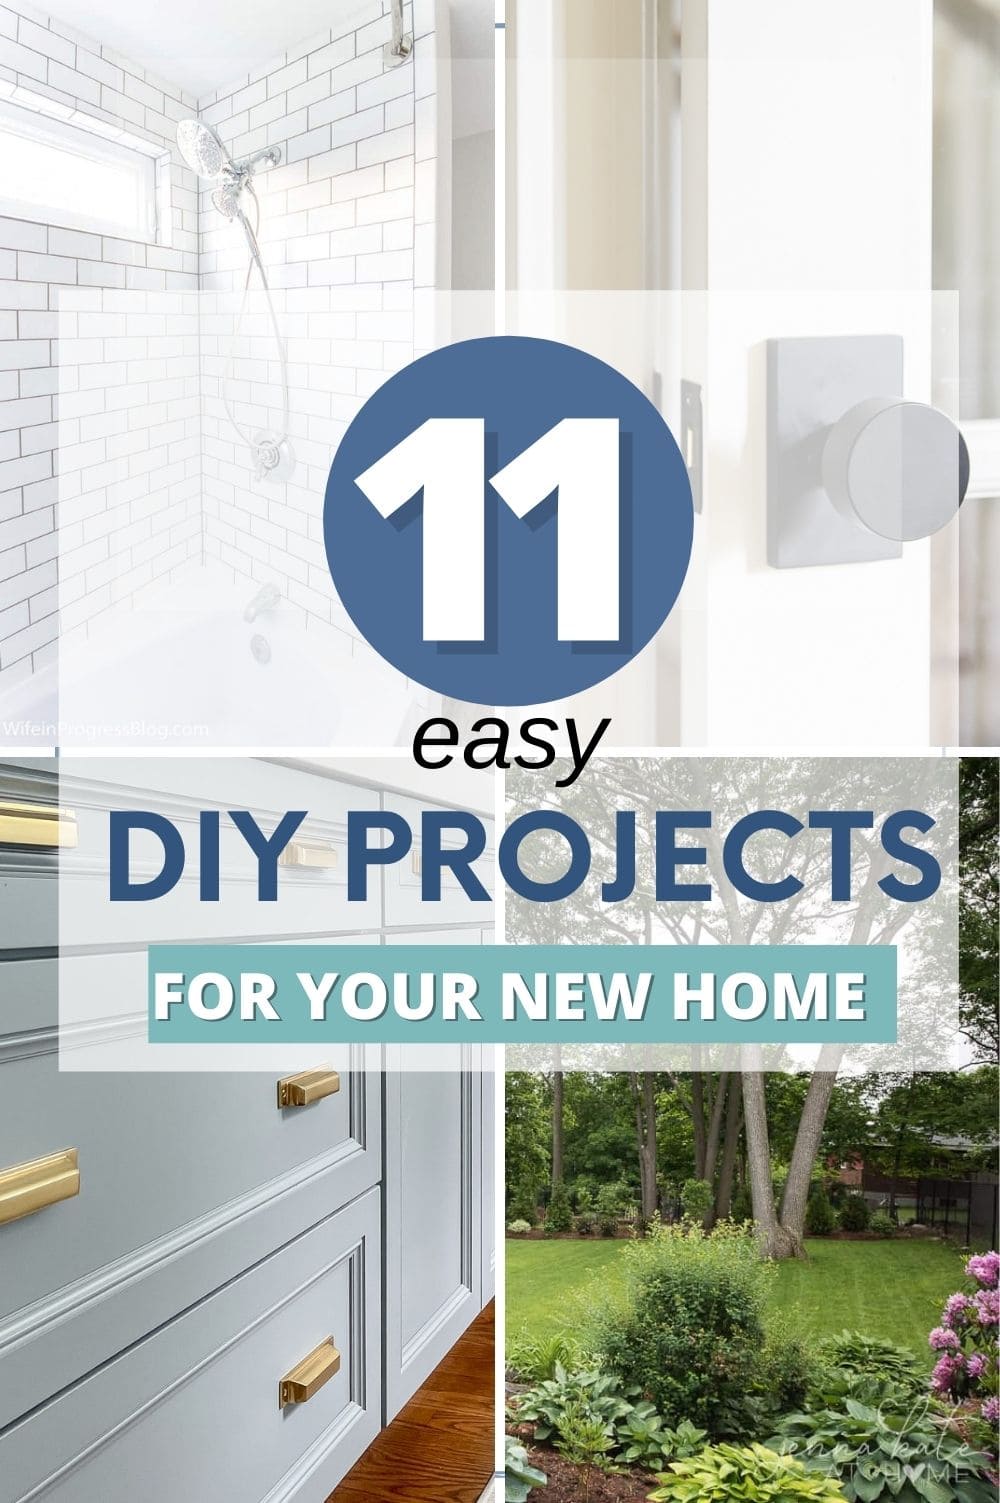 diy projetcts for your new home pin